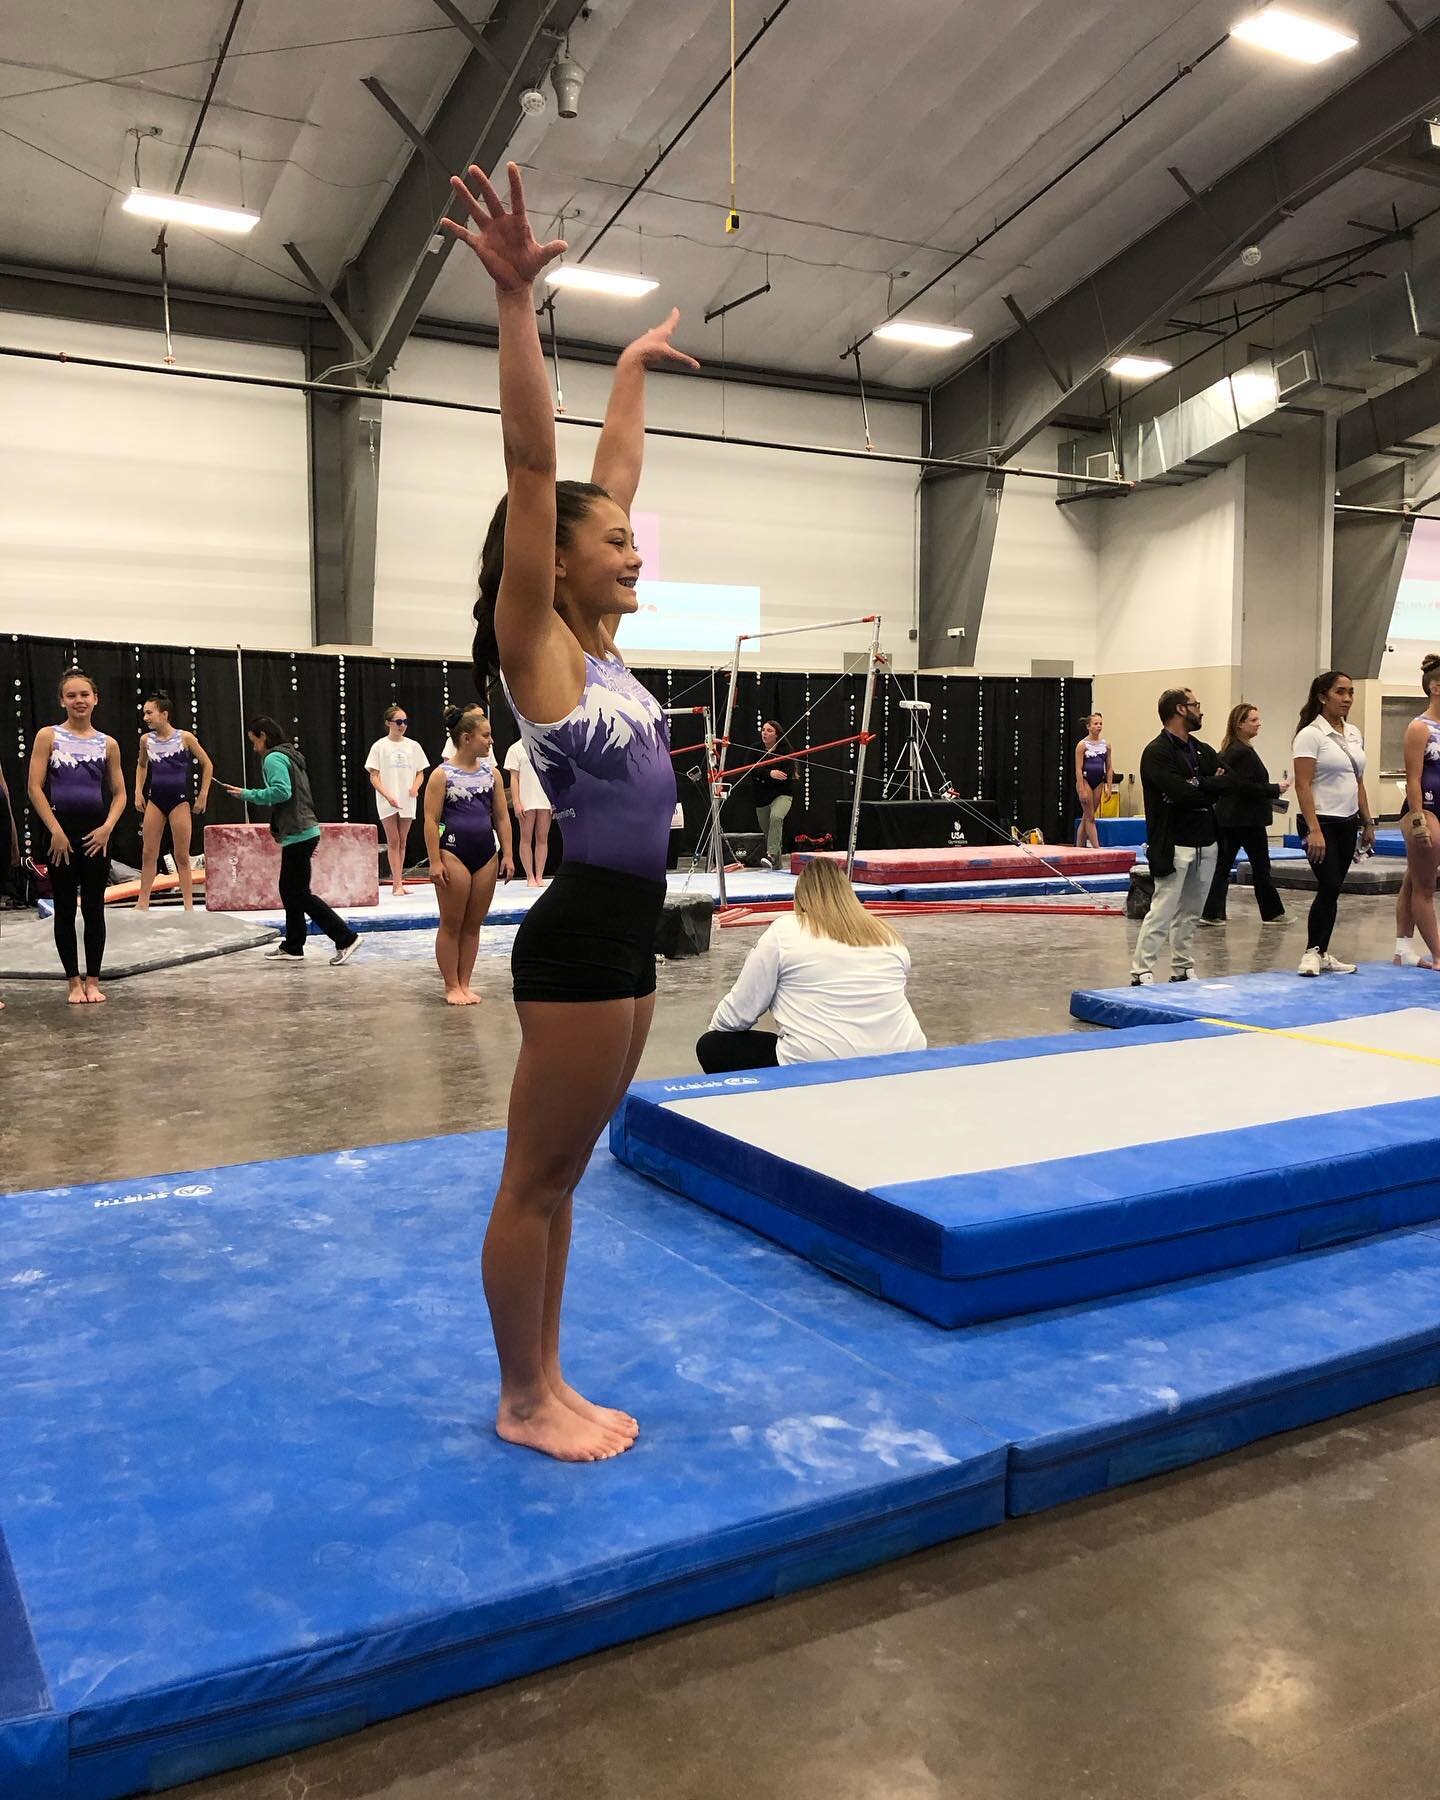 Congrats to Zy for doing awesome at her first ever Platinum Regional meet!! Highlight: she placed 2nd on Vault with a 9.35!

#arkvalleyathletics #regionals #xcel #platinum #second